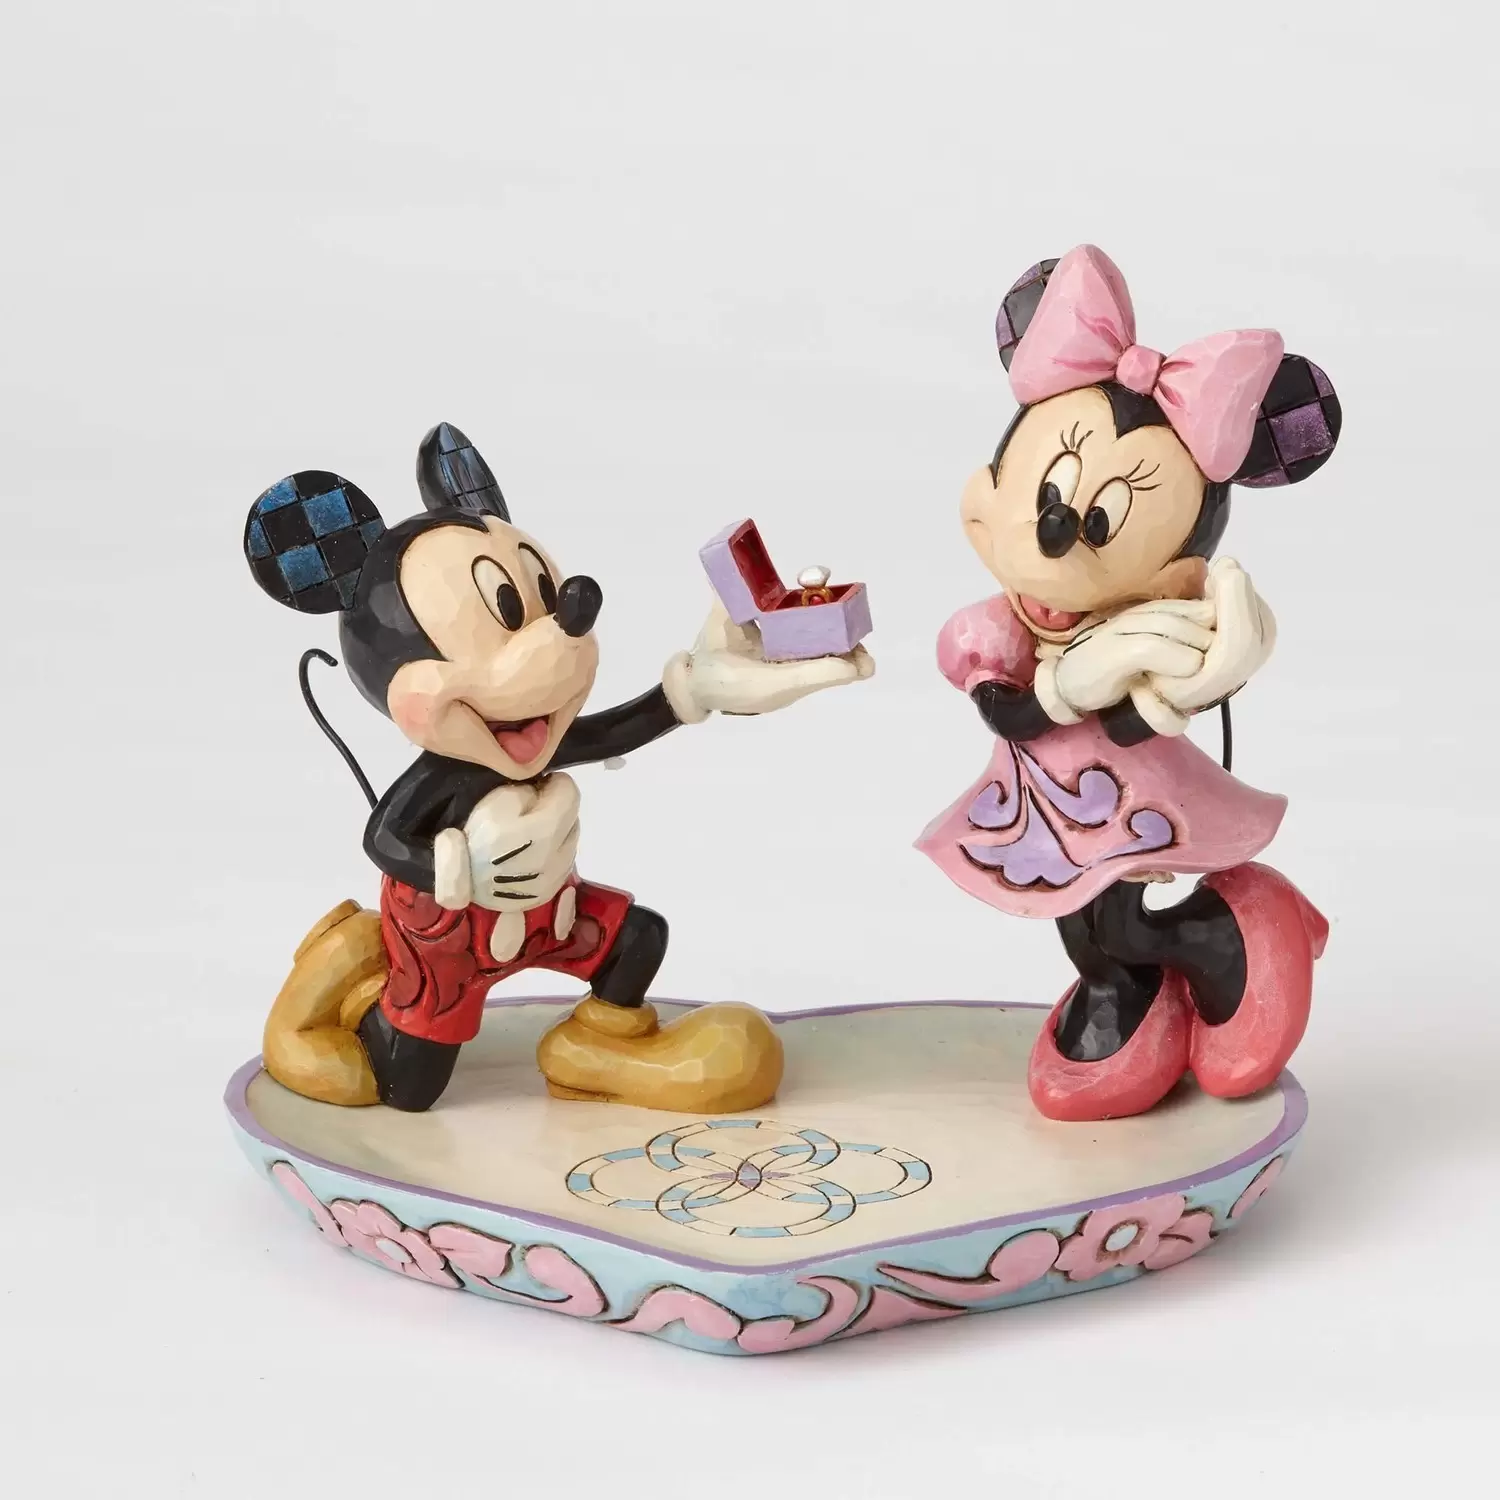 Disney Traditions by Jim Shore - A Magical Moment - Mickey Proposing to Minnie